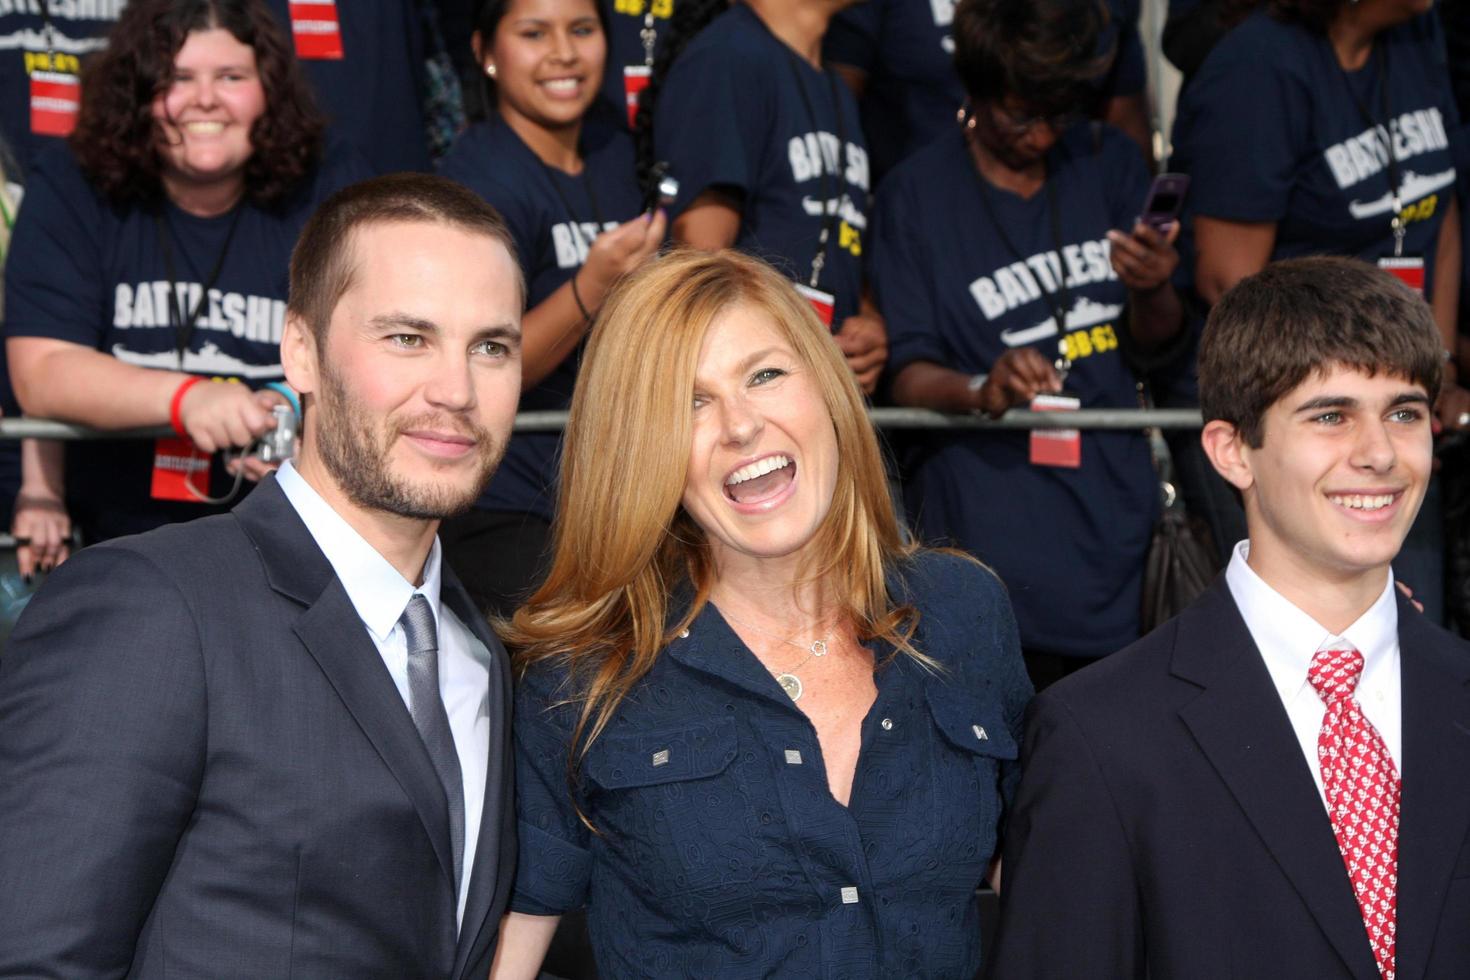 LOS ANGELES - MAY 10 - Taylor Kitsch, Connie Britton arrives at the Battleship LA Premiere at Nokia Theater  LA Live on May 10, 2012 in Los Angeles, CA photo